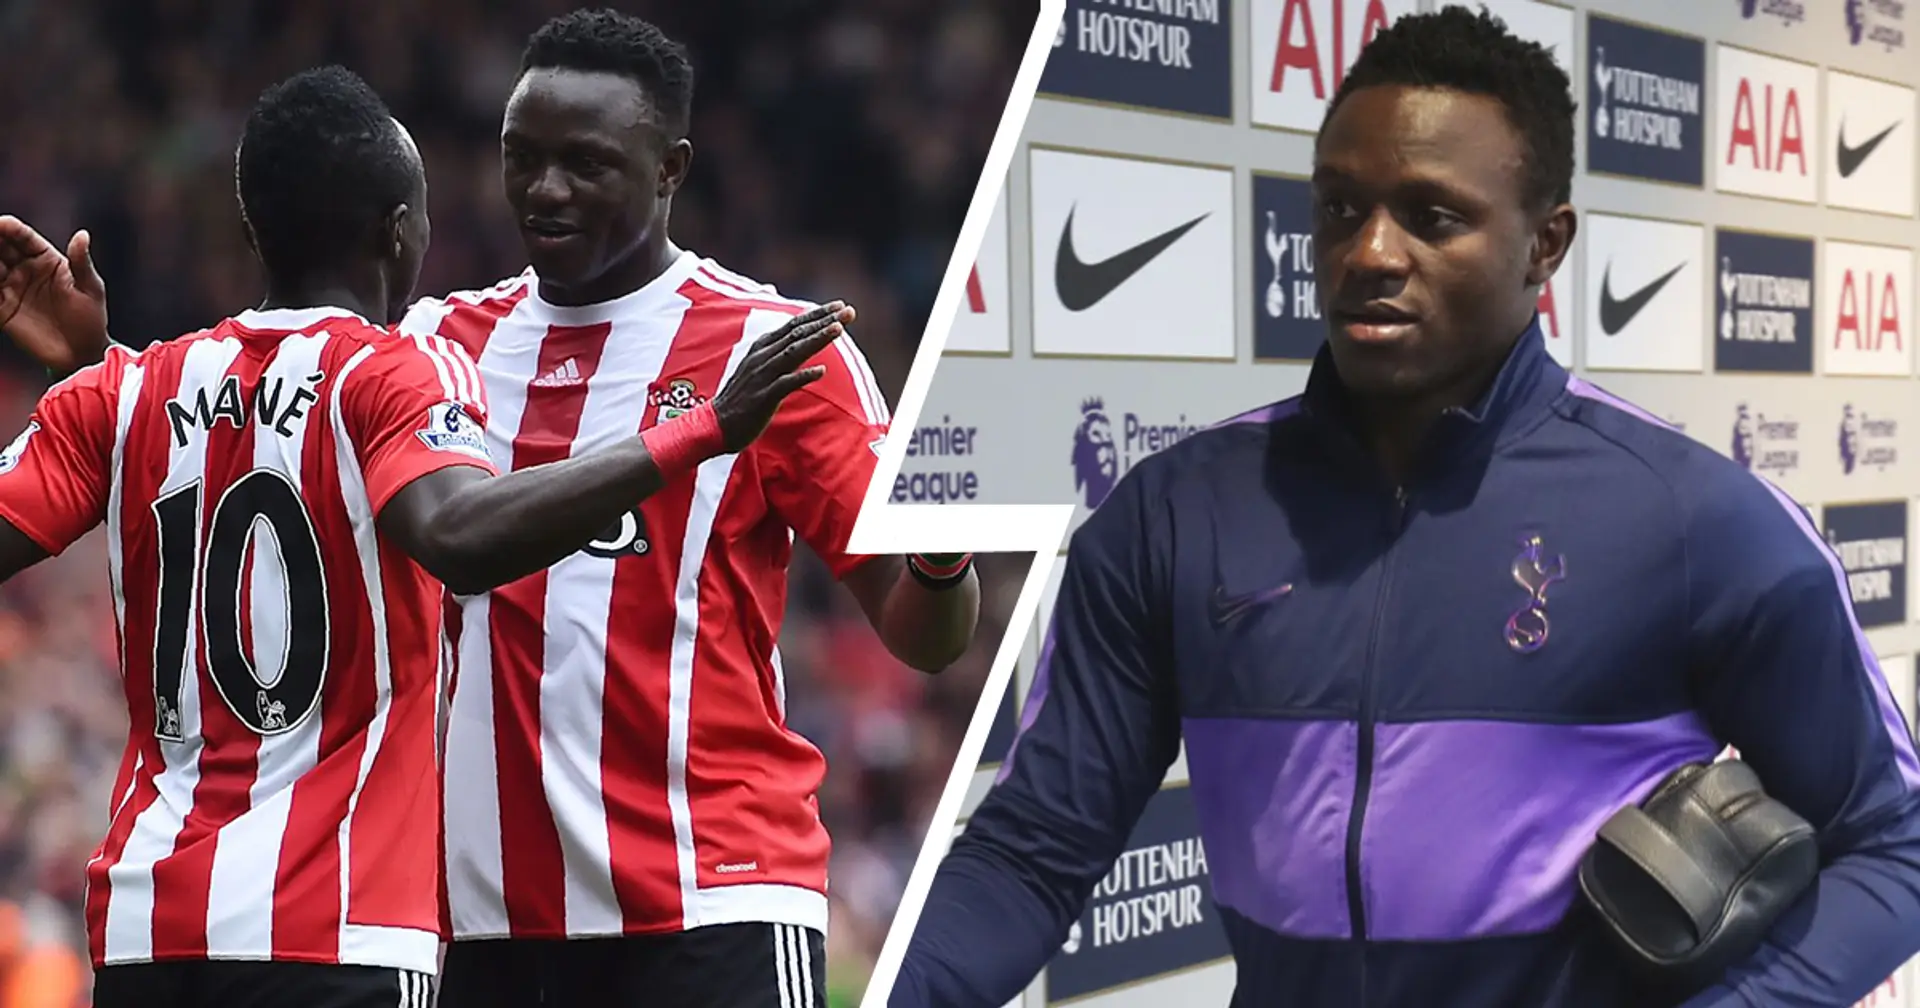 'Can the two of us play closely? They don't want me to score': Wanyama reveals how Mane thought Southampton teammates didn't want to pass him